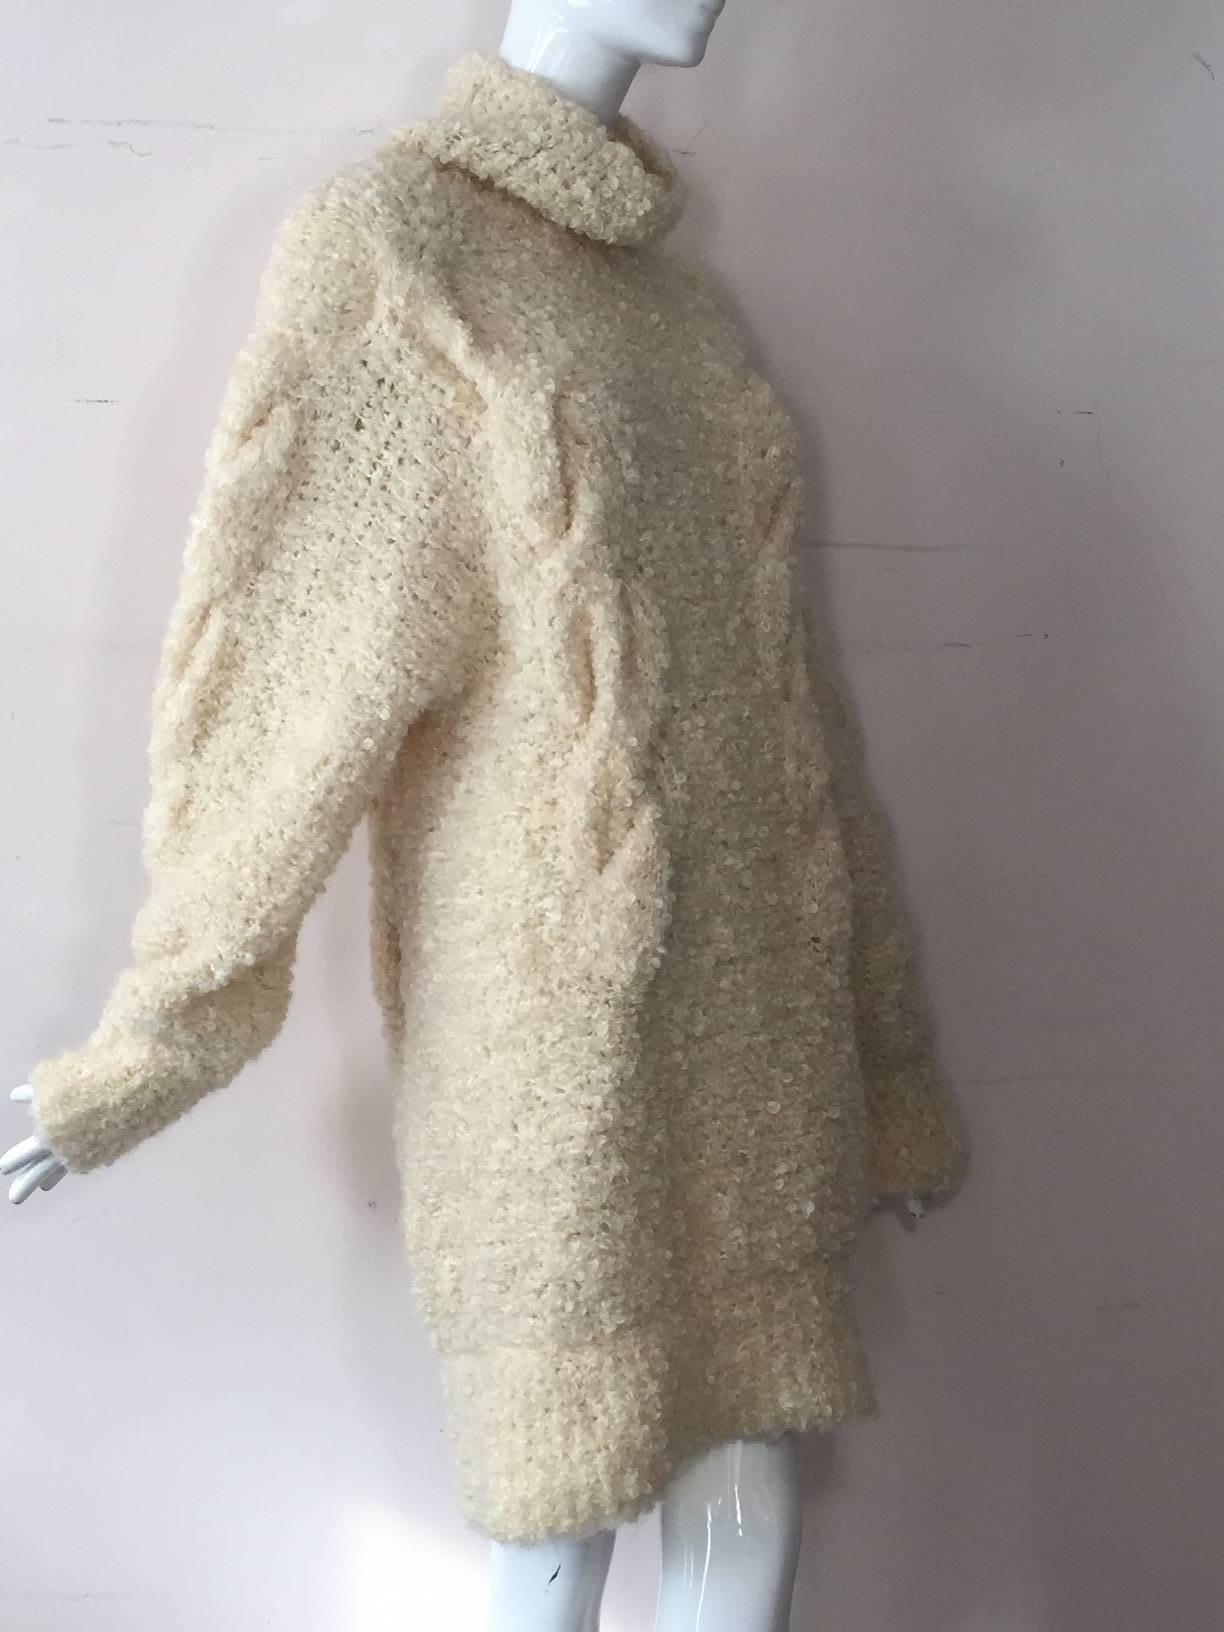 Women's 1990s Audrey Daniels Boucle Cable Knit Sweater Dress in Ivory Wool